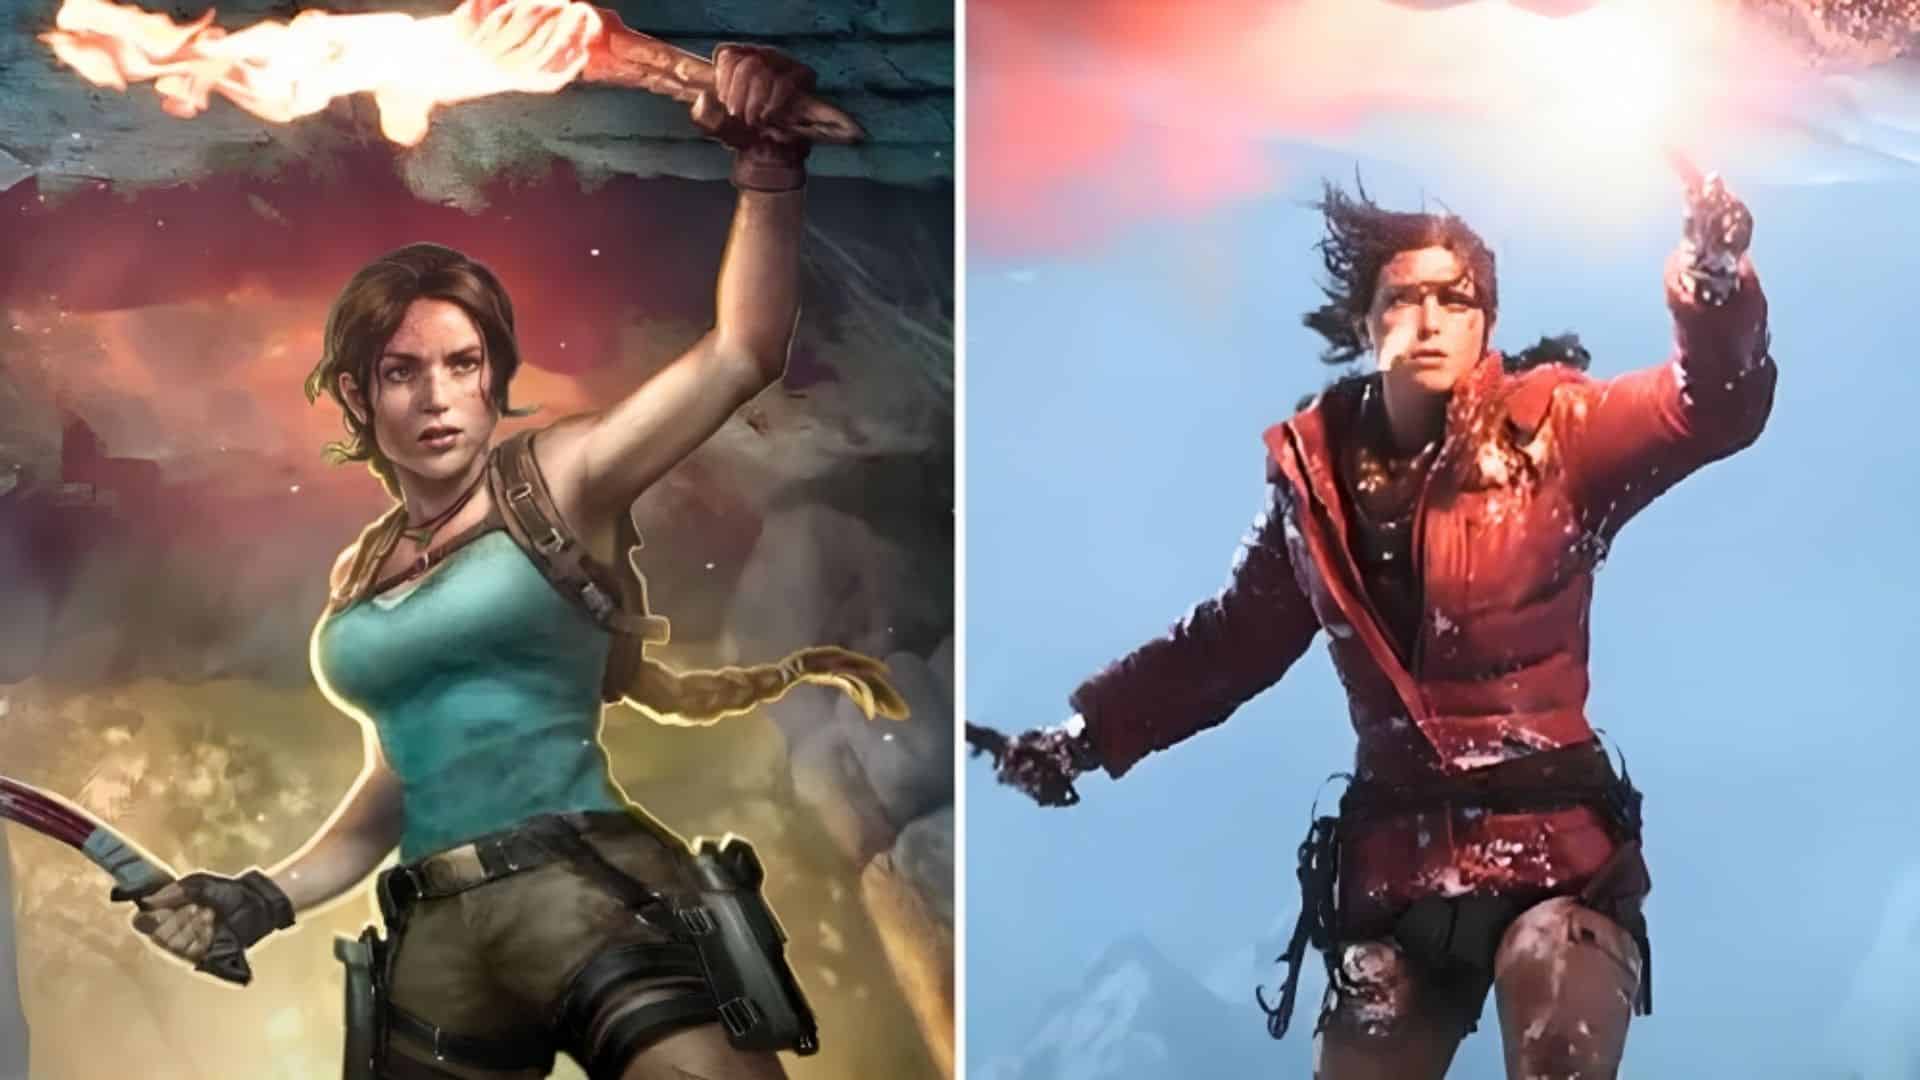 Tomb Raider MTG card possibly shows new Lara Croft model for upcoming sequel